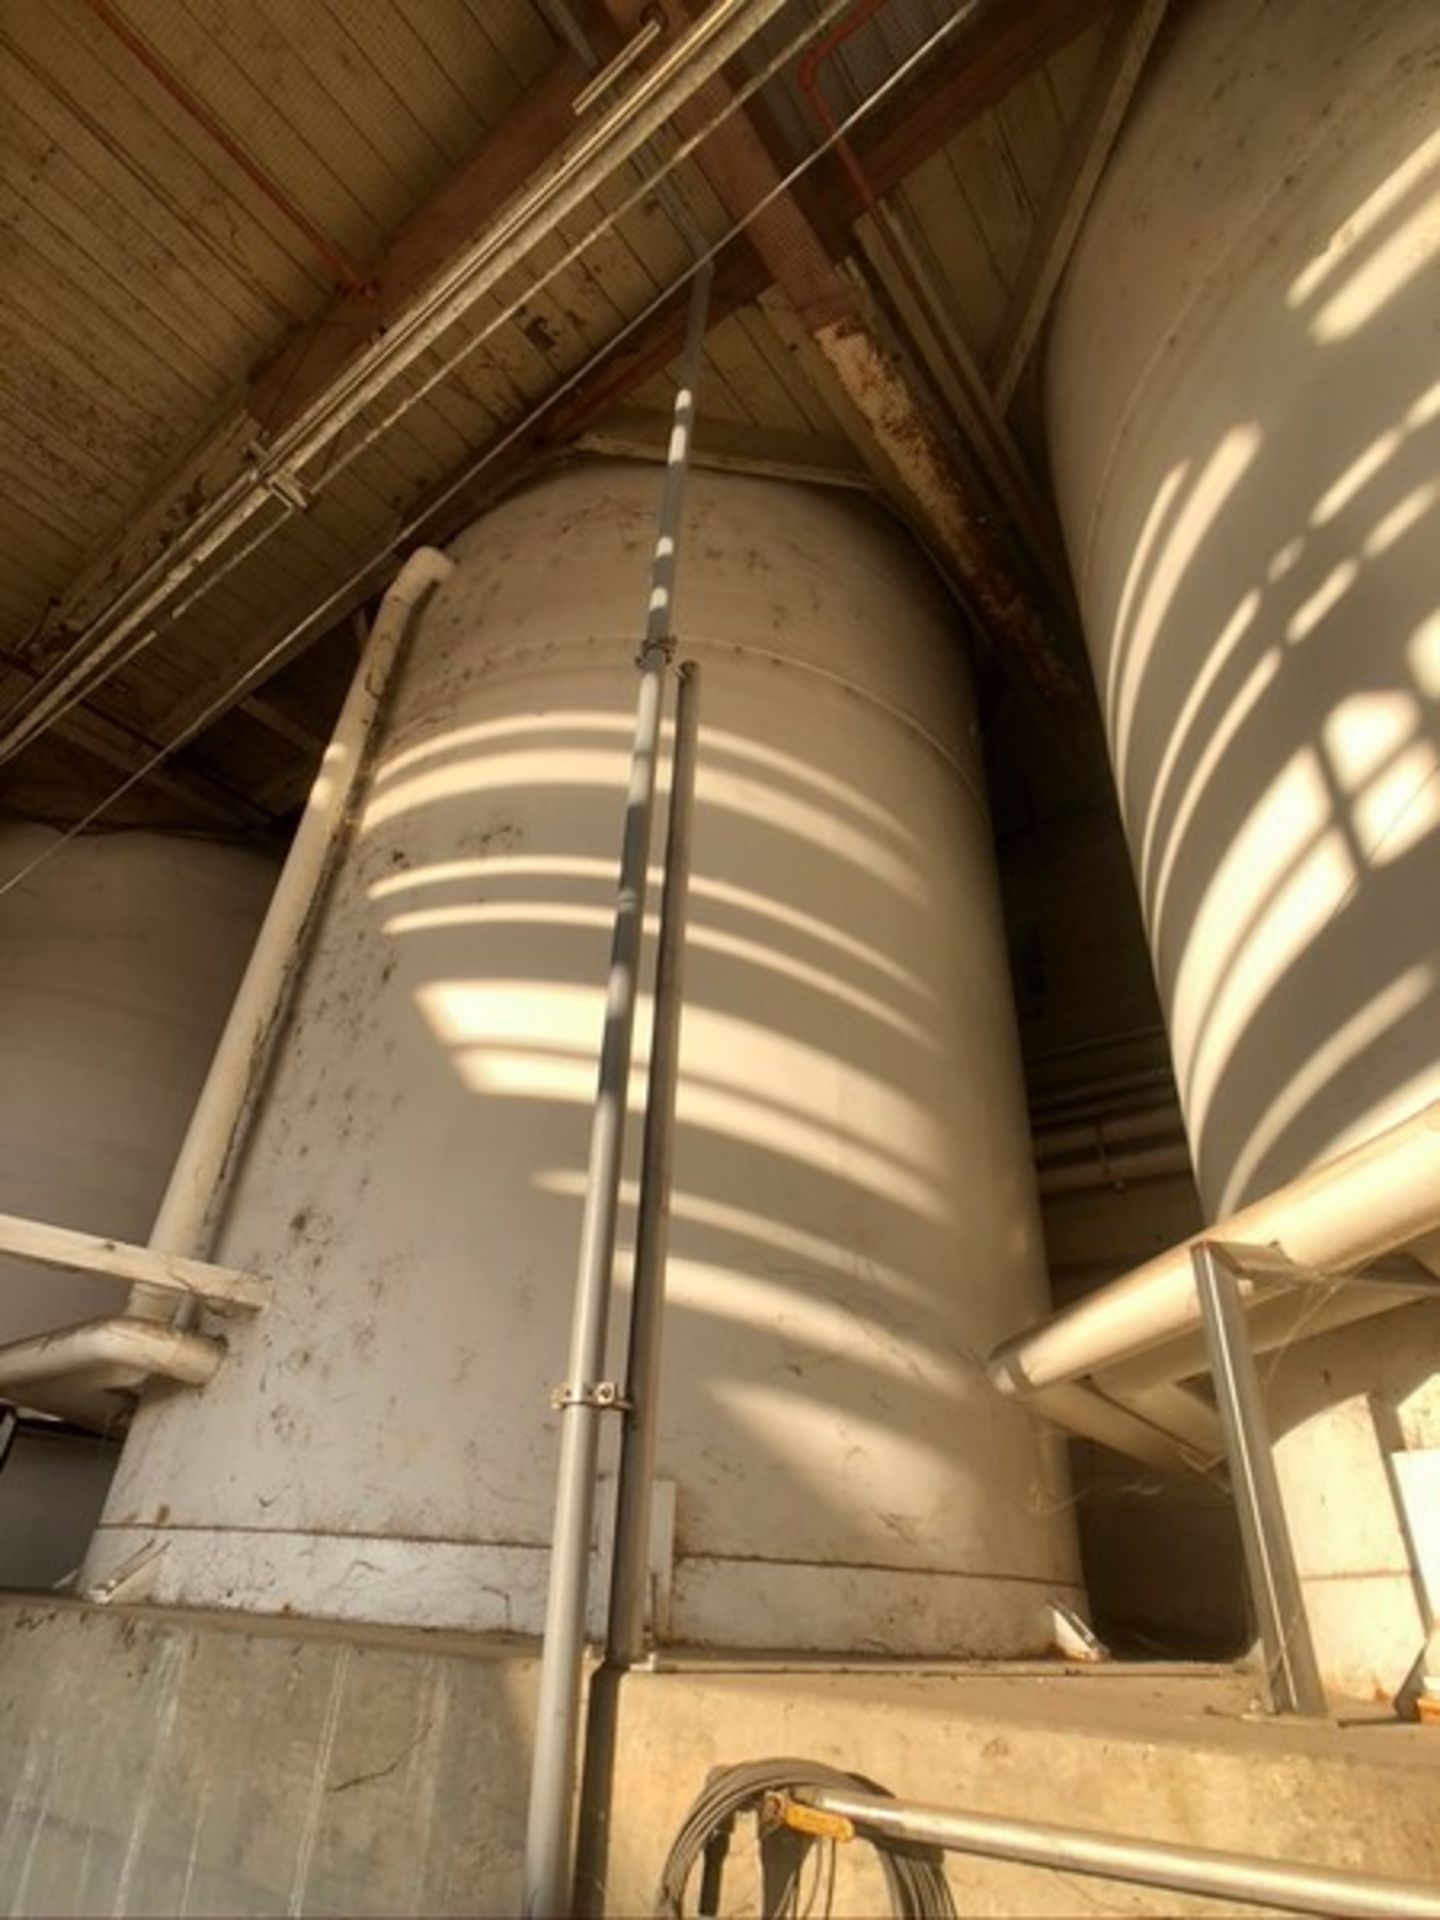 CHERRY BURRELL APPX. 15,000 GALLON JACKETED SILO, EQUIPPED WITH VERTICAL AGITATION, WCB INLET VALVE, - Image 8 of 25